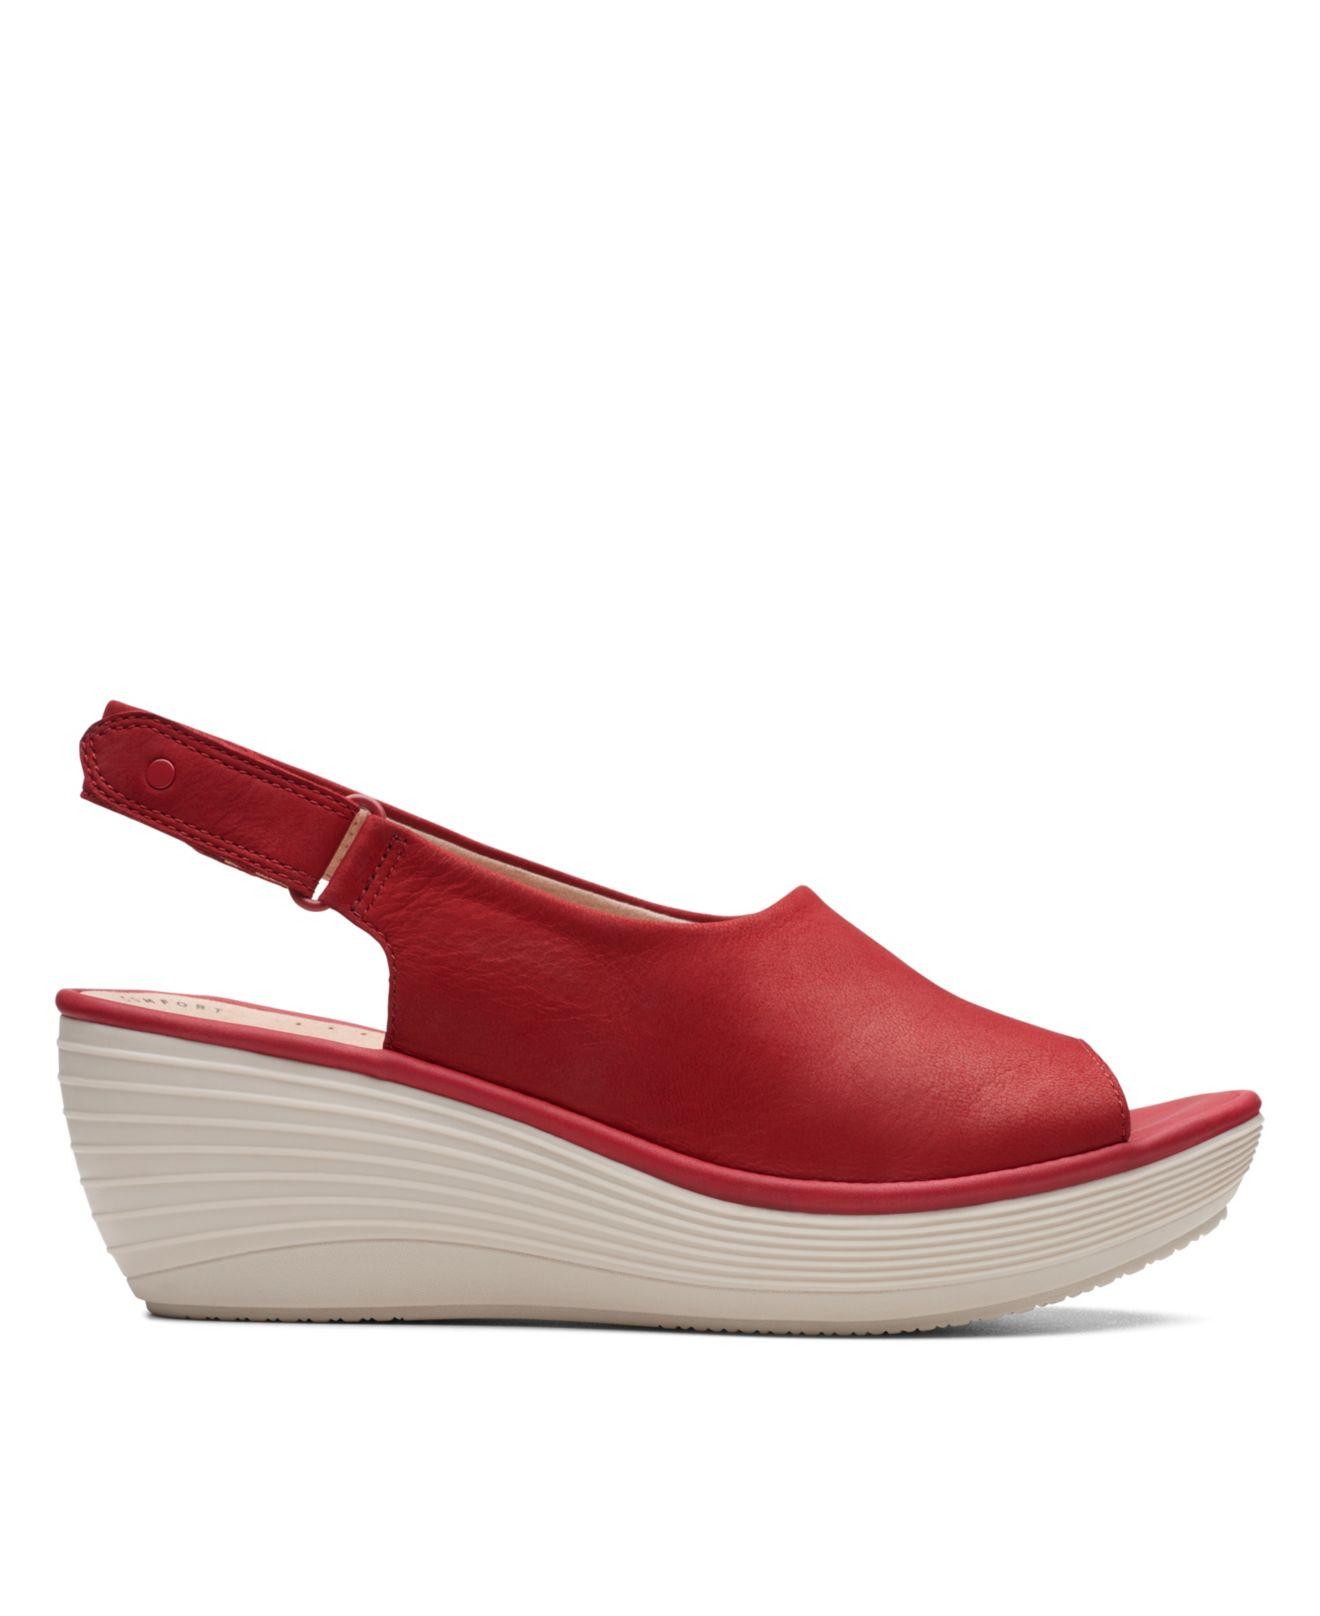 Clarks Reedly Shaina Wedge Sandal in Red | Lyst